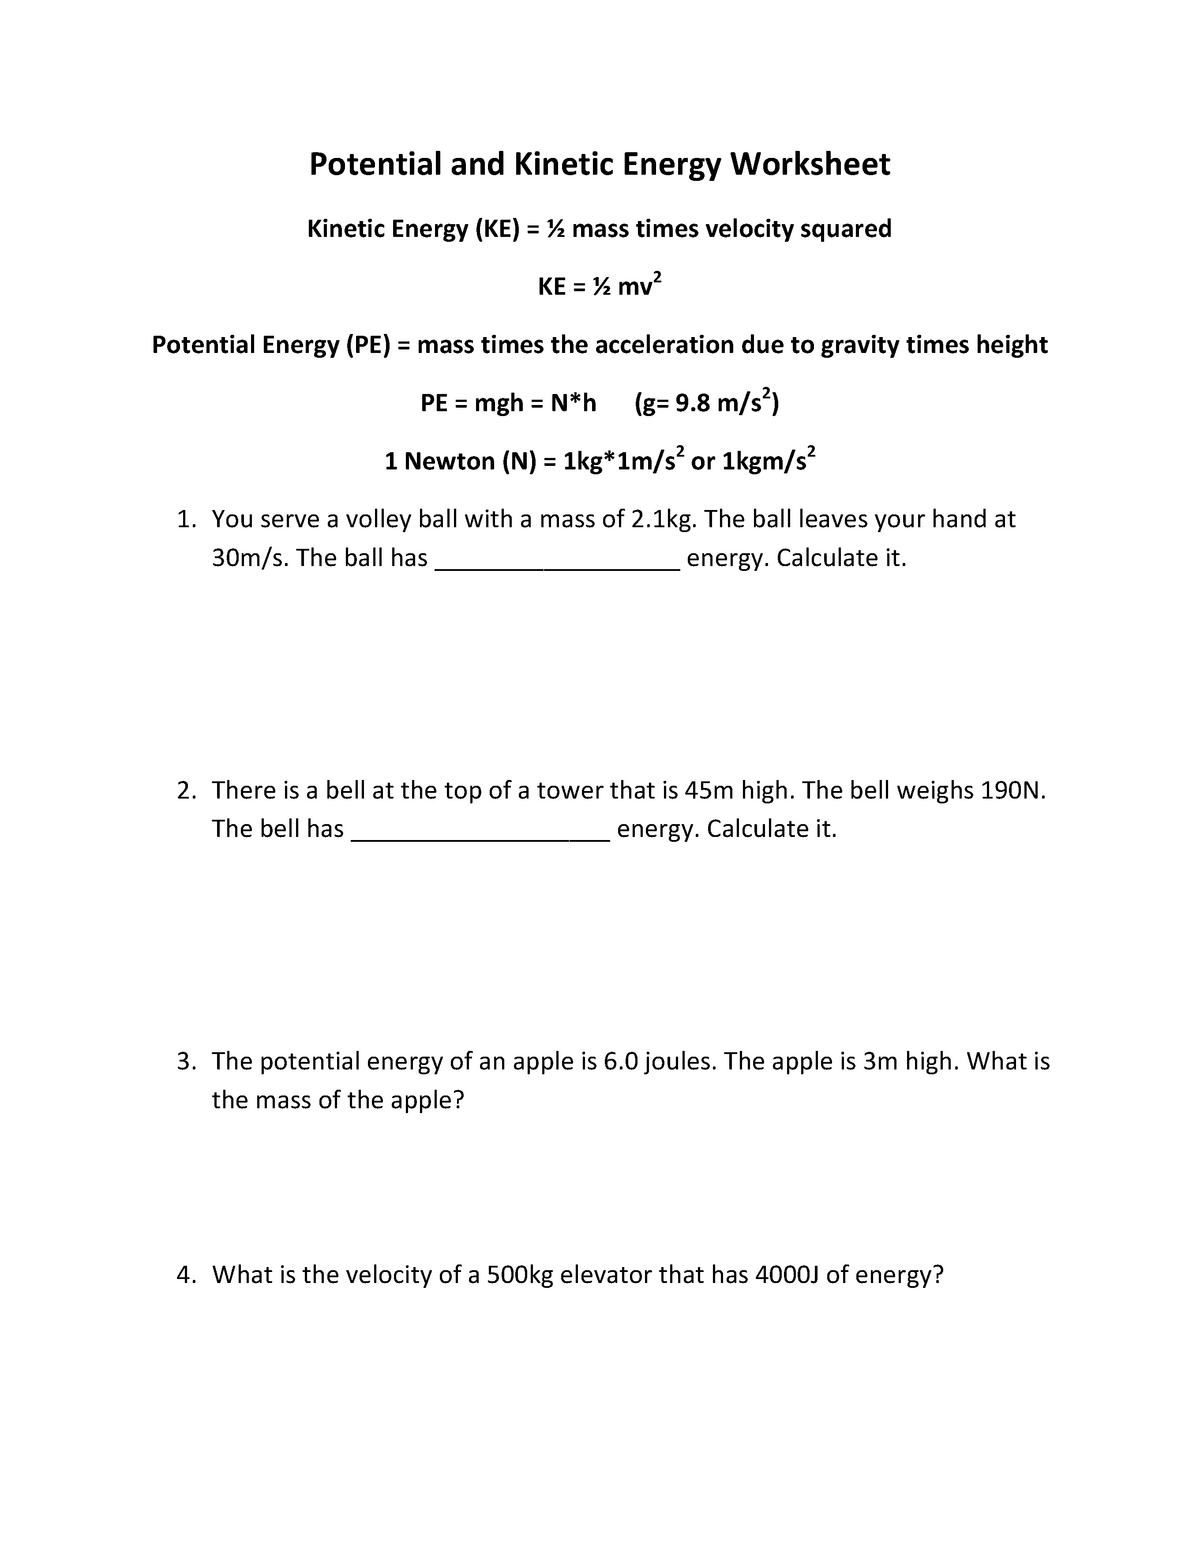 Potential and Kinetic Energy Worksheet - science - 24 - UAEU For Kinetic And Potential Energy Worksheet